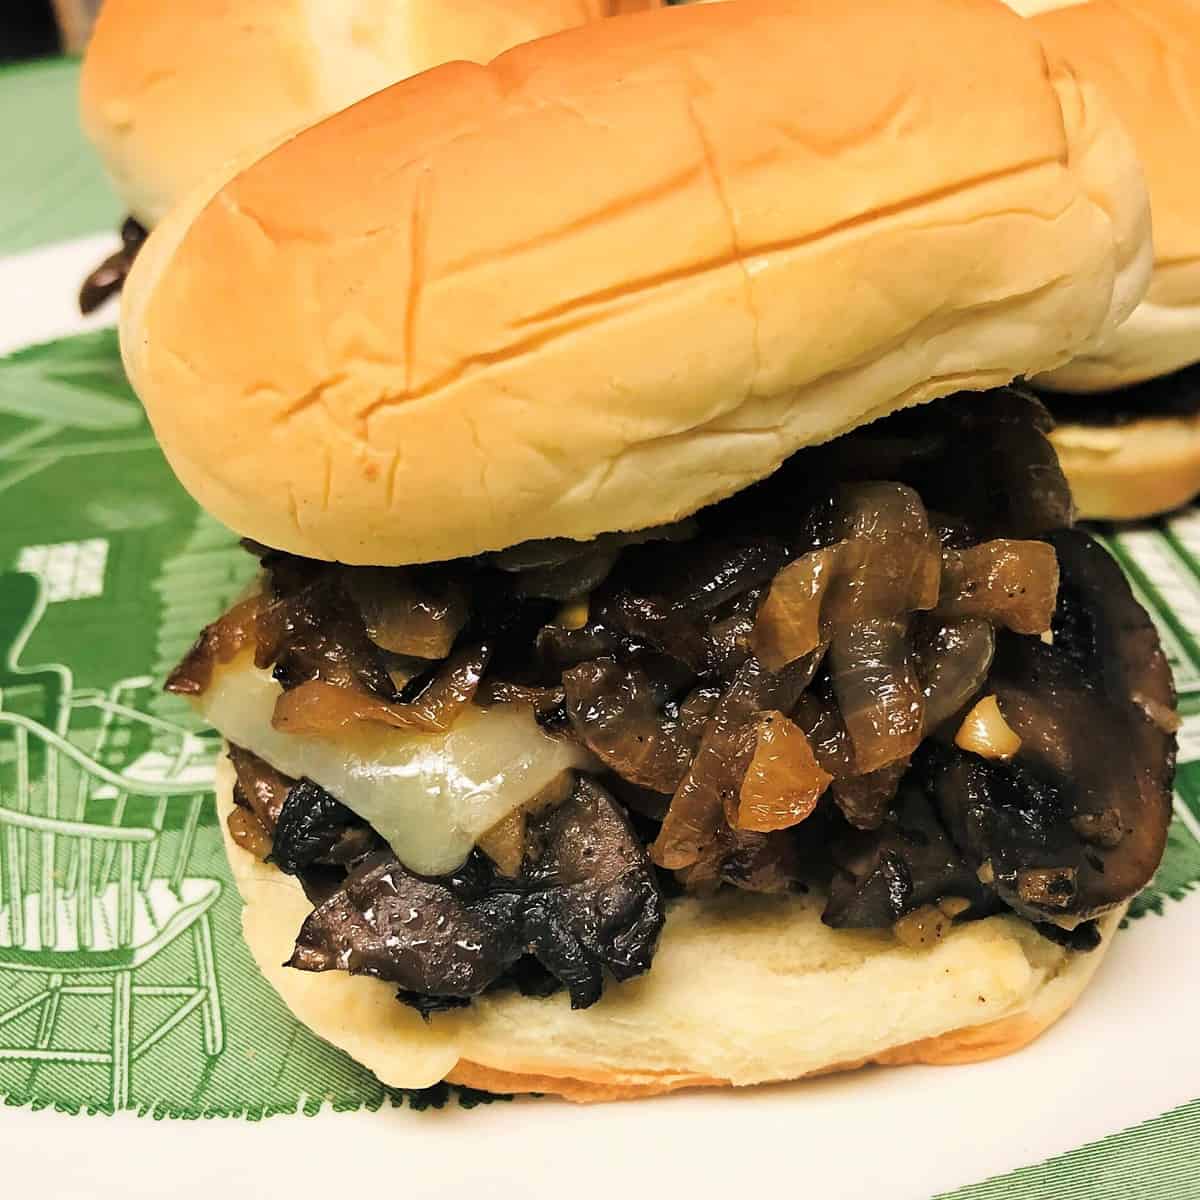  These Sloppy Josephine Sliders are the perfect cure for your hunger pangs.